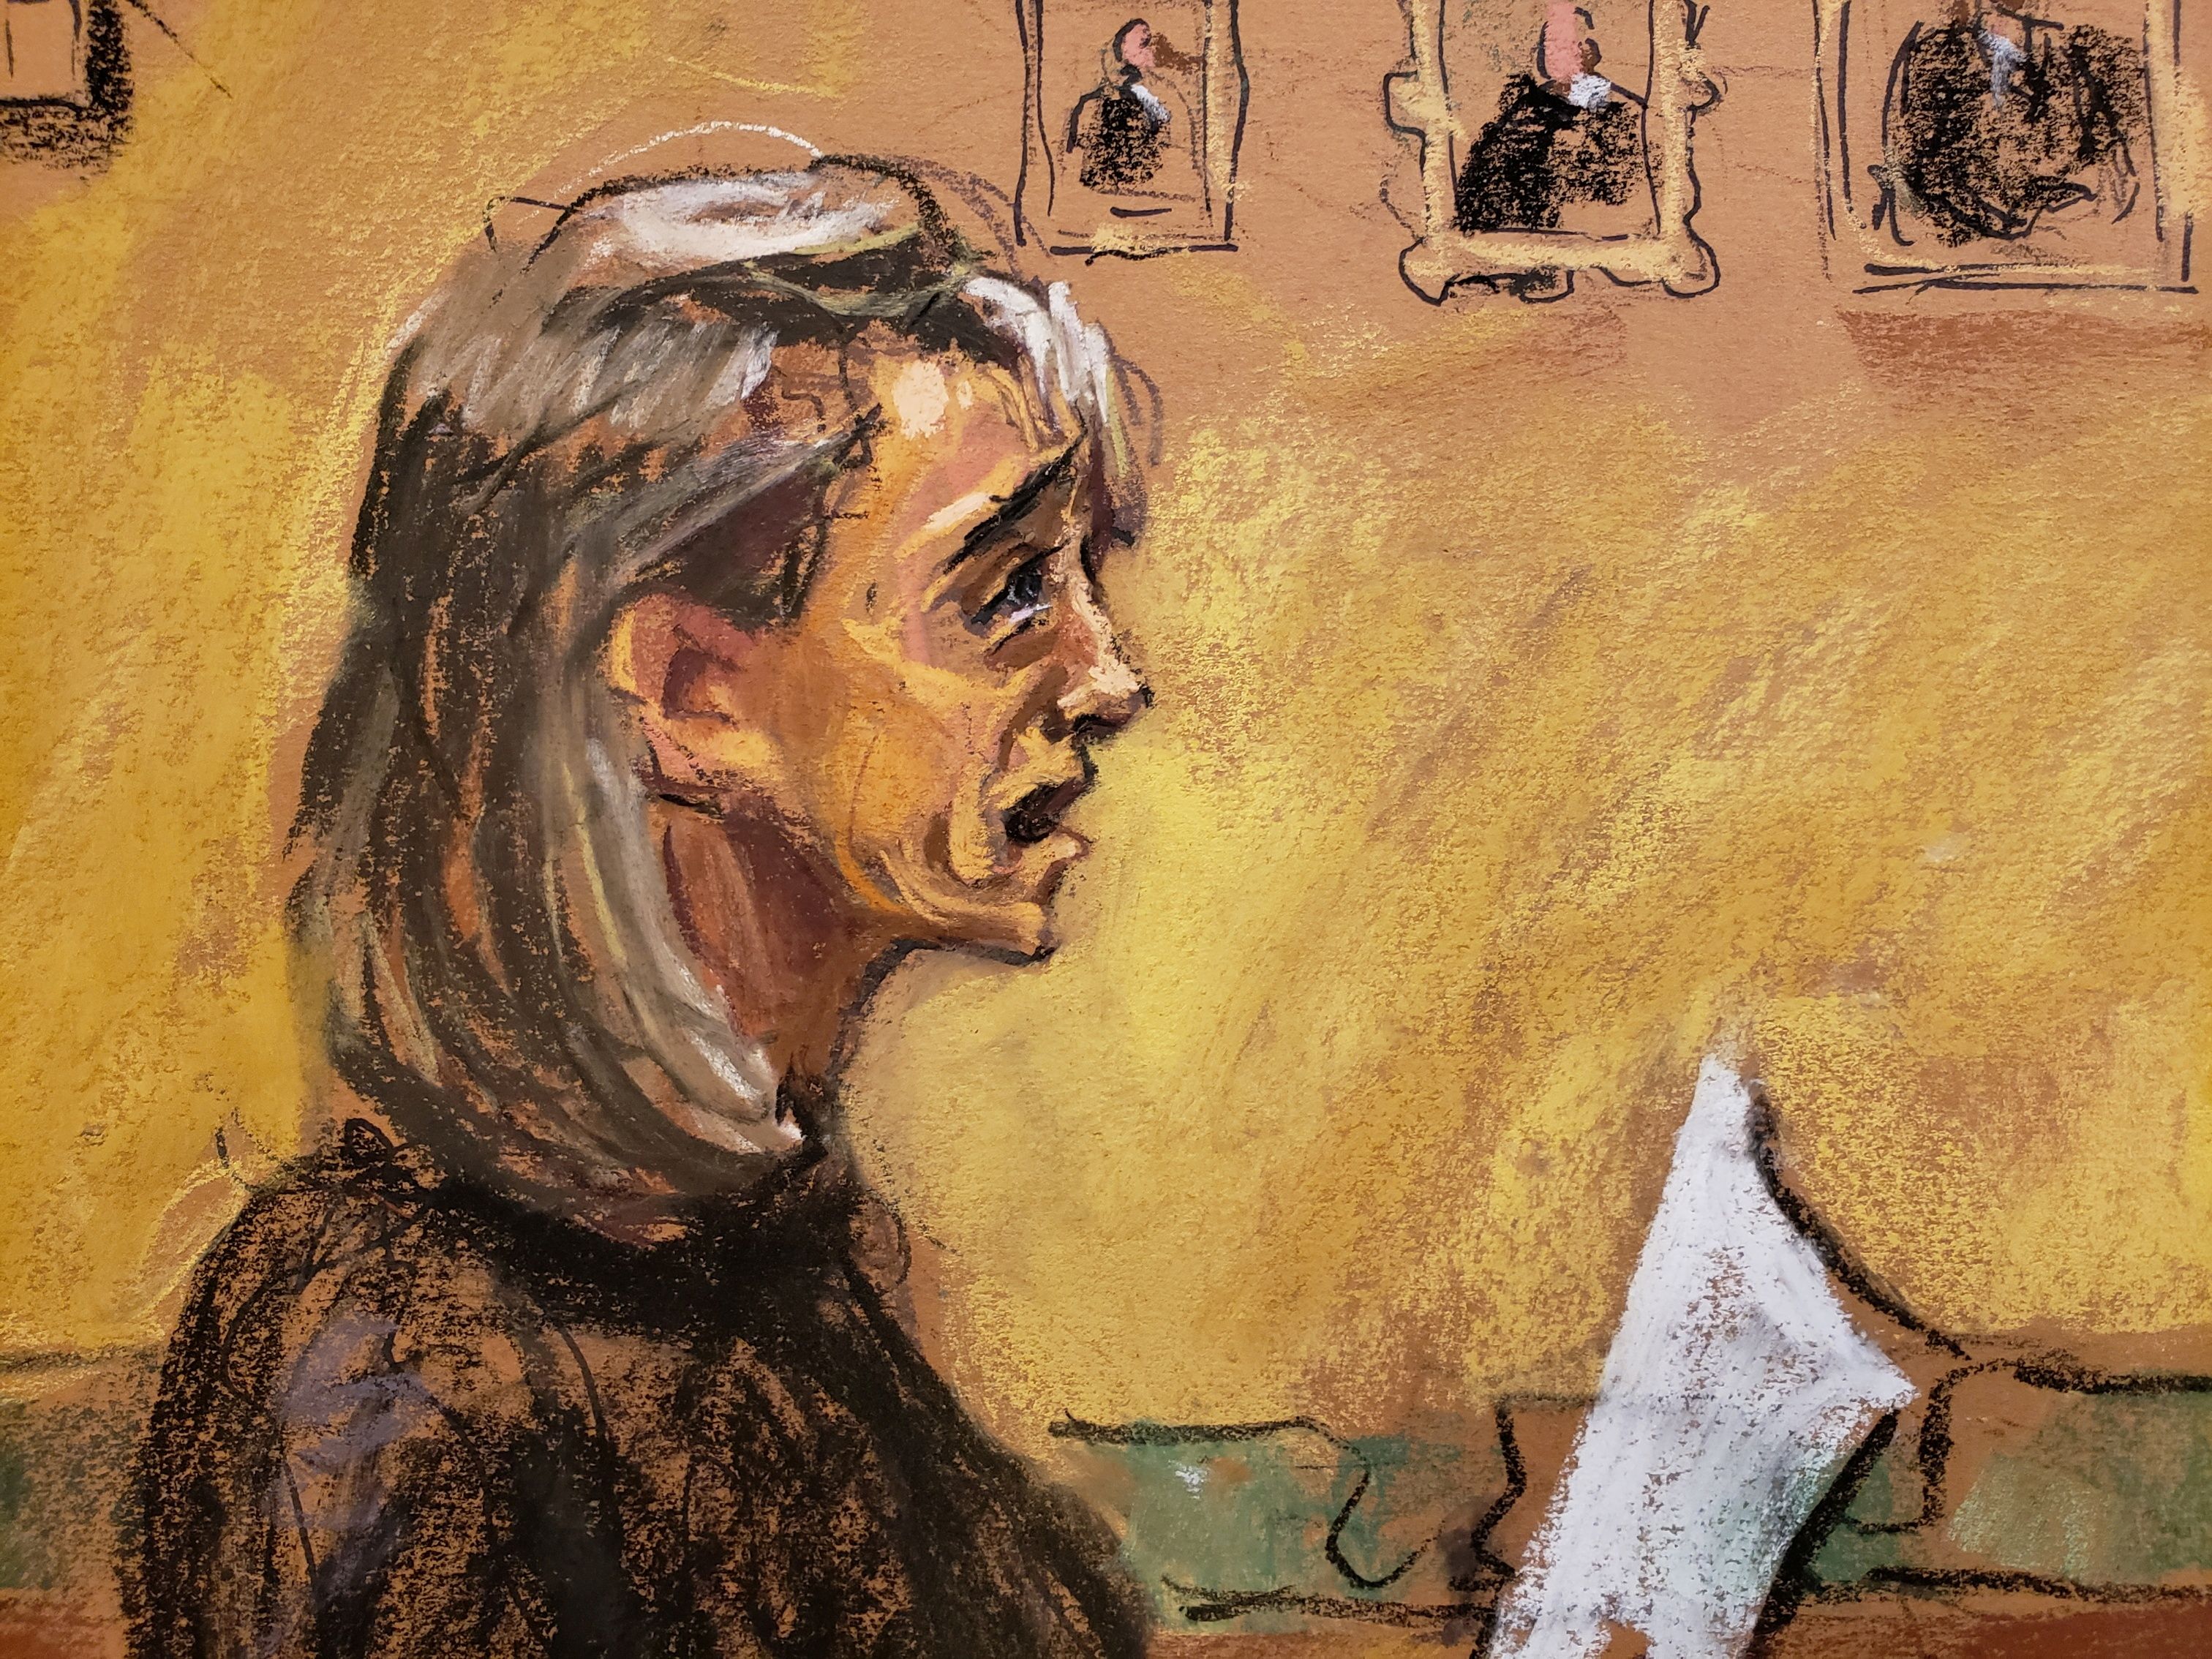 Actor Allison Mack, known for her role in the TV series 'Smallville', weeps while apologising to victims in the United States Federal Courthouse after being sentenced for her part in NXIVM cult, in Brooklyn, New York City, U.S., June 30, 2021 in this courtroom sketch. REUTERS/Jane Rosenberg